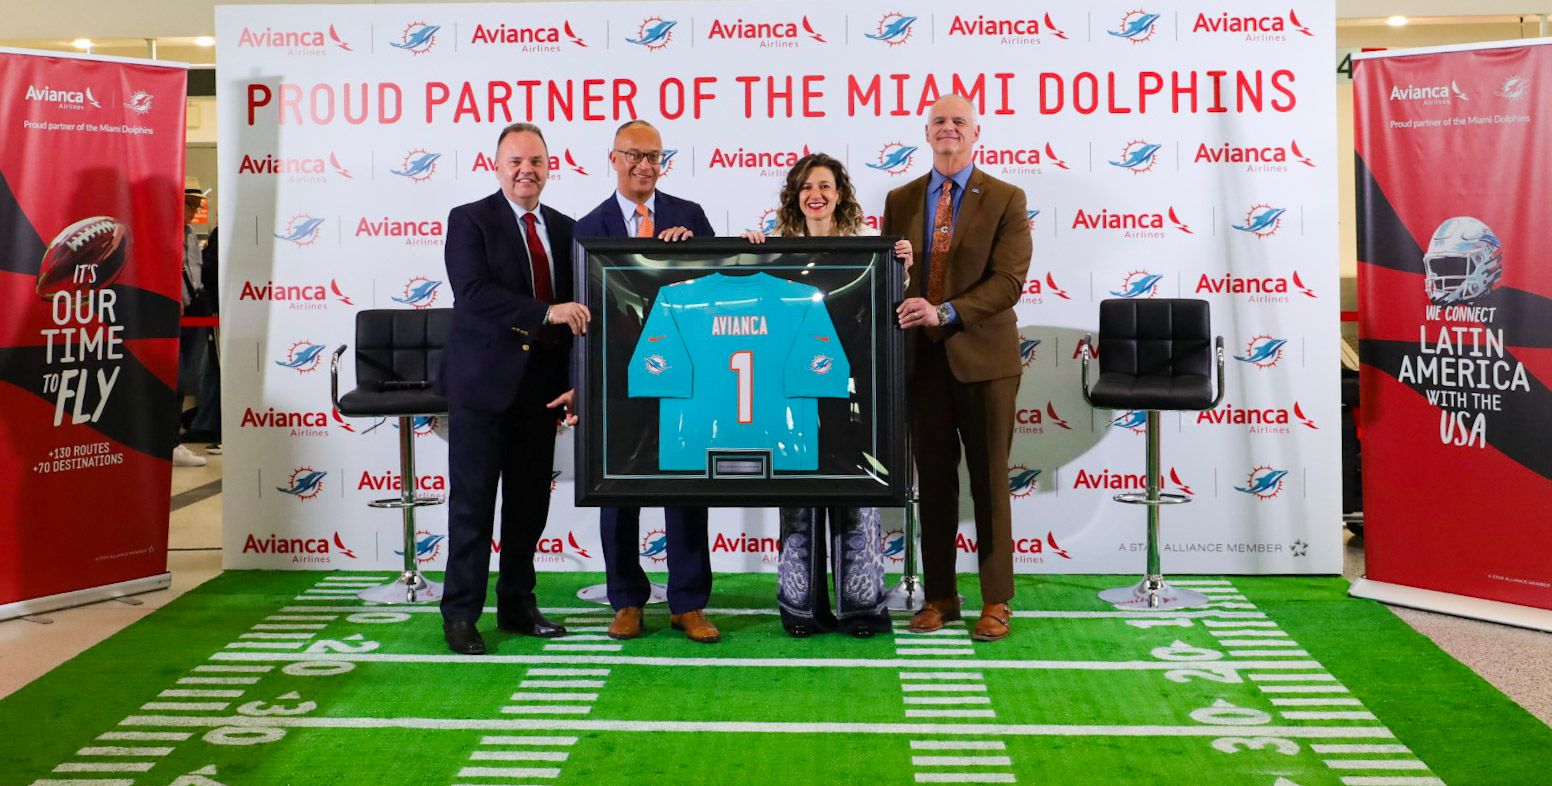 Avianca Airlines and Miami Dolphins executives